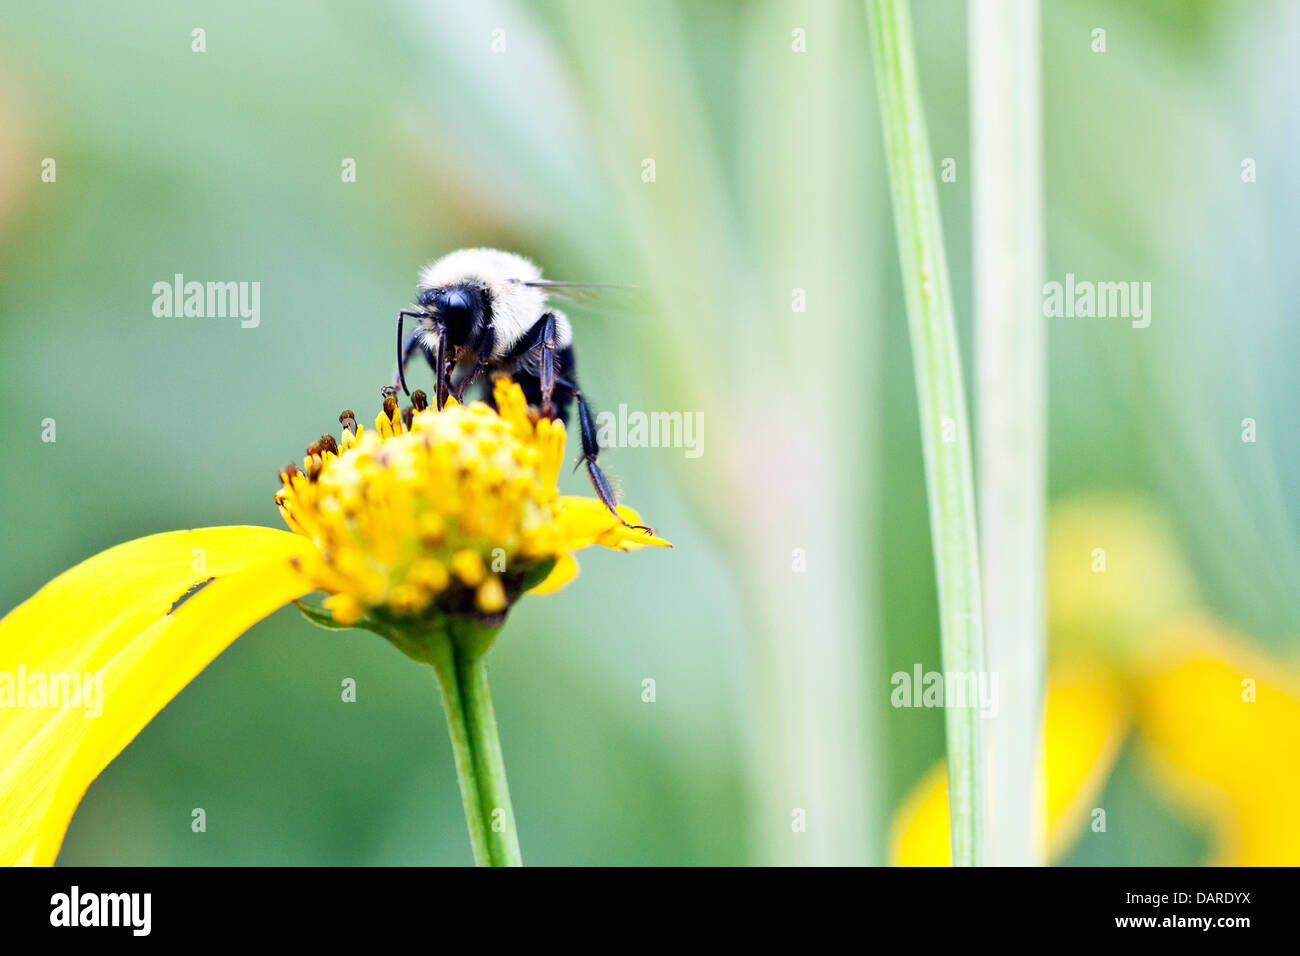 Bumble Bee on a yellow flower with only two petals Stock Photo